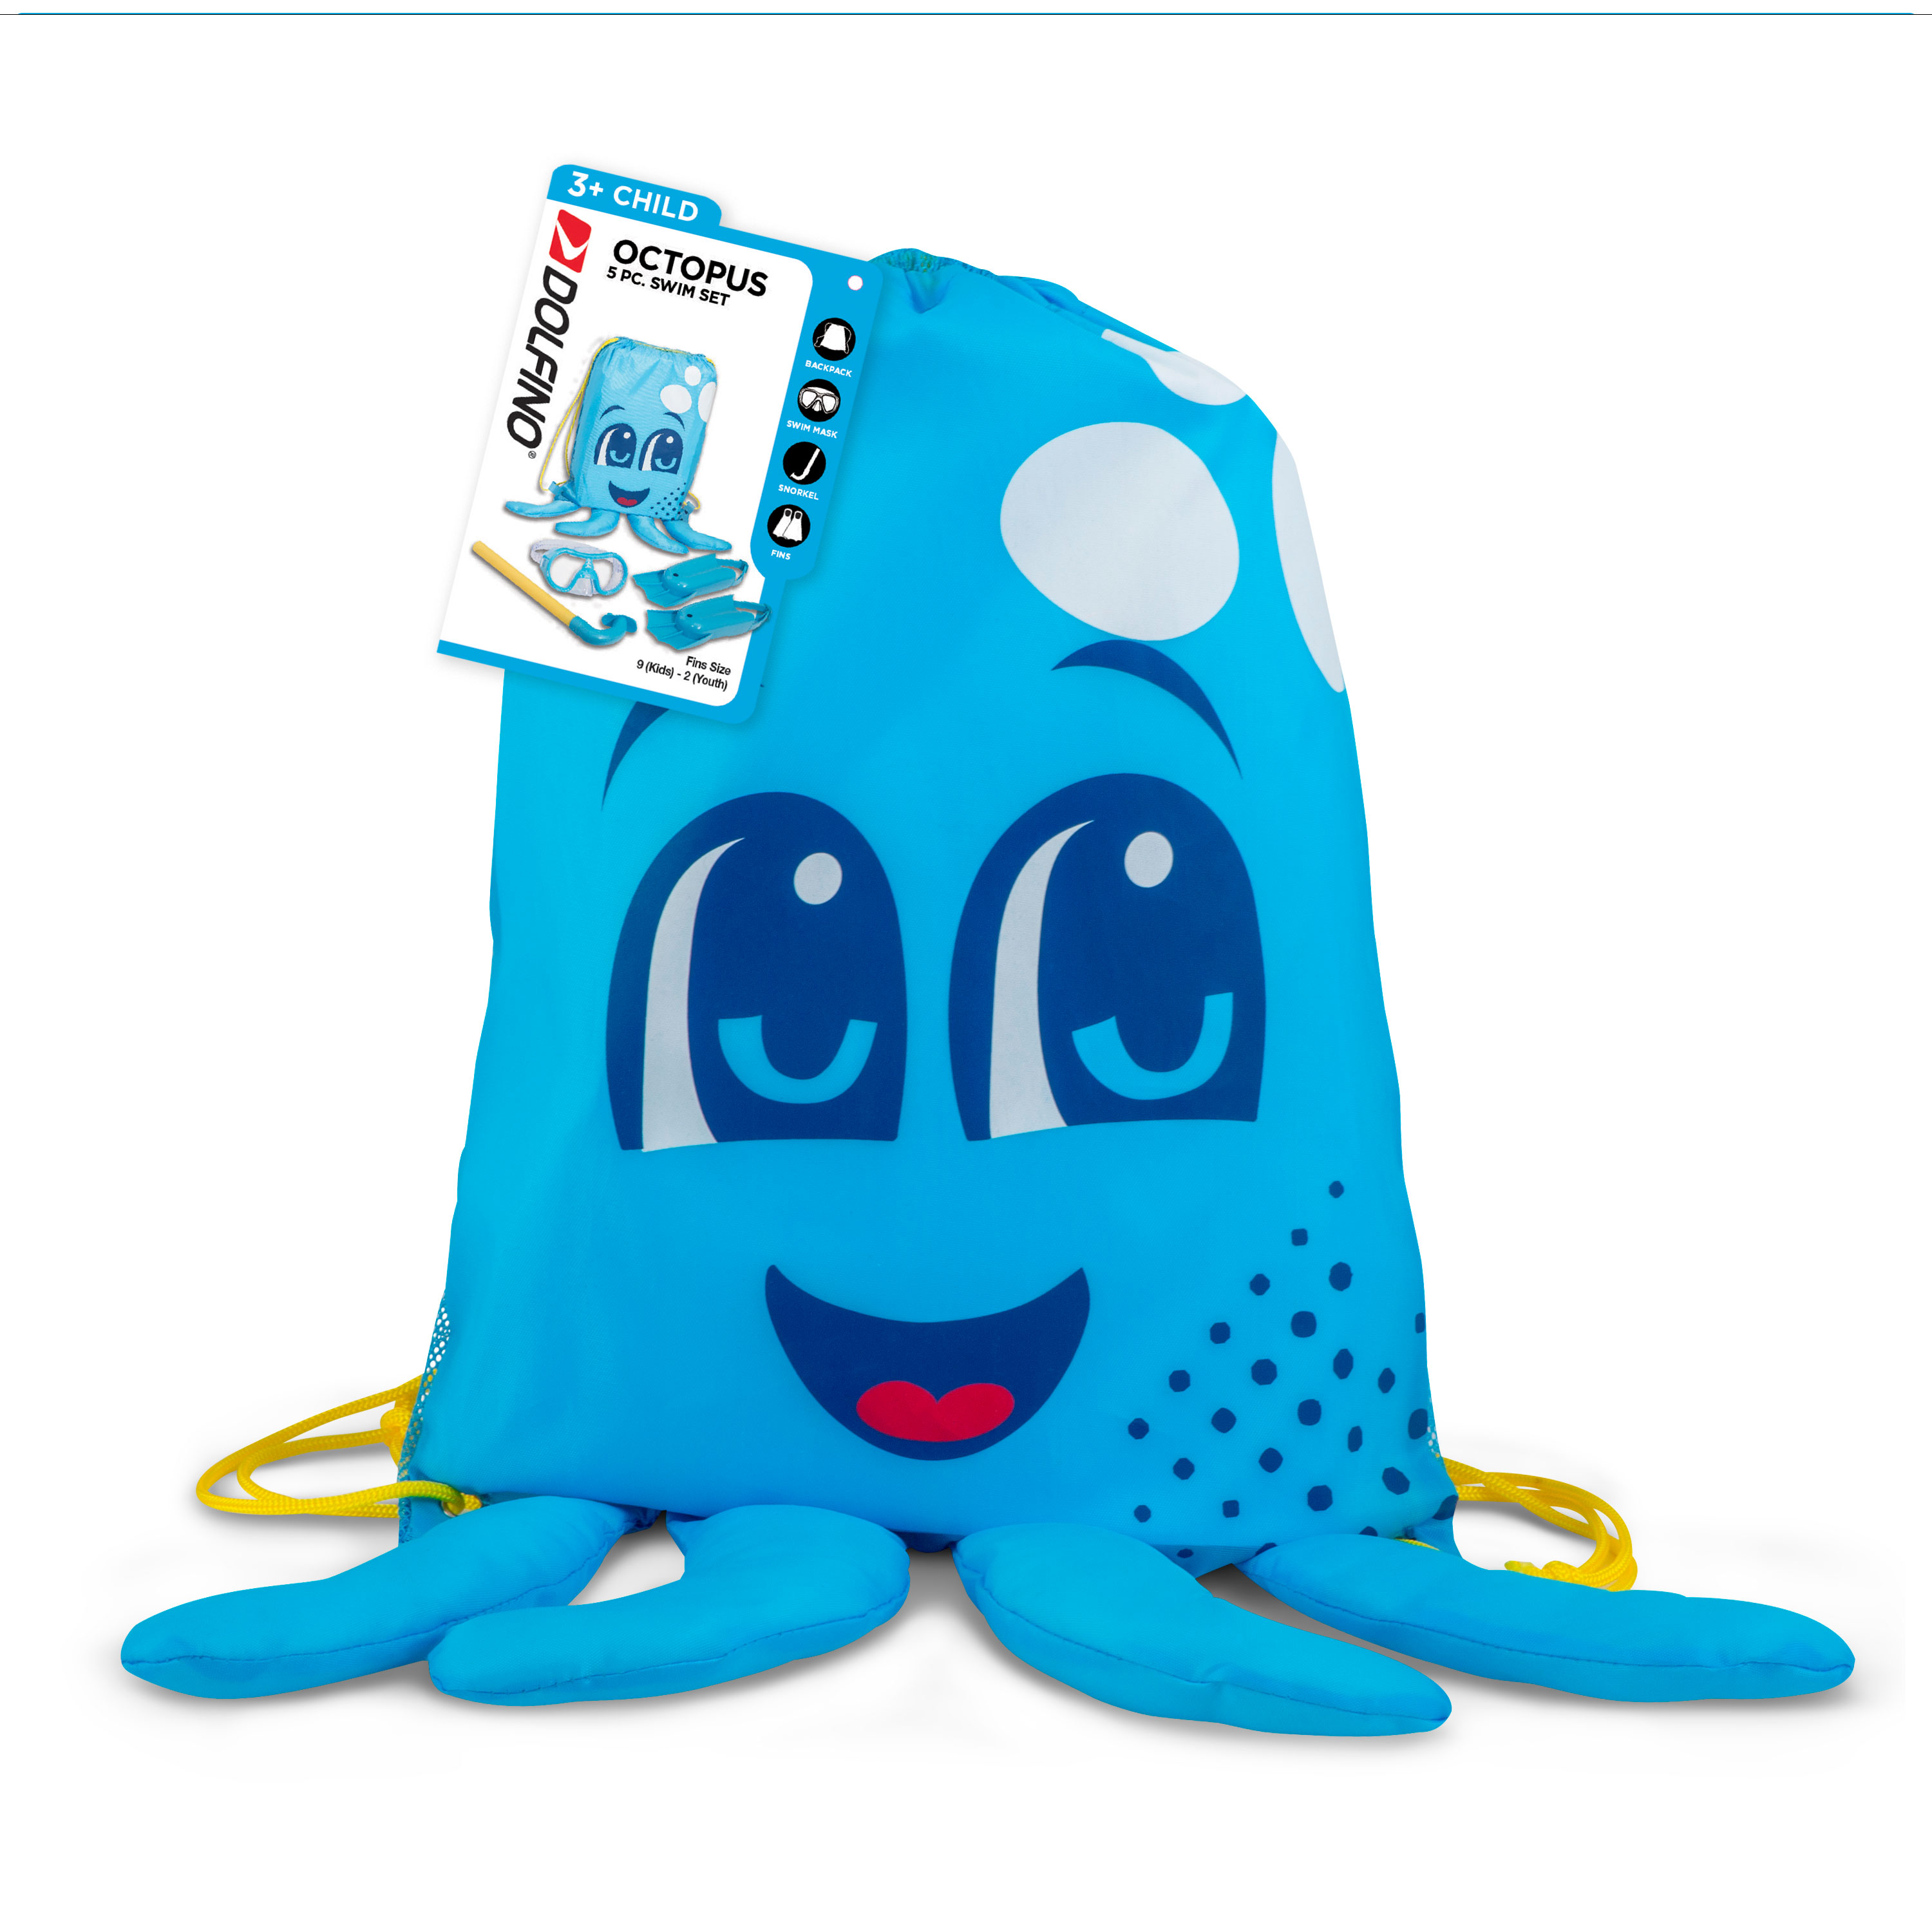 Dolfino Octopus Blue Unisex Dive Set for Children, Includes 5 Pieces, Hypoallergenic and Latex-Free - image 1 of 8